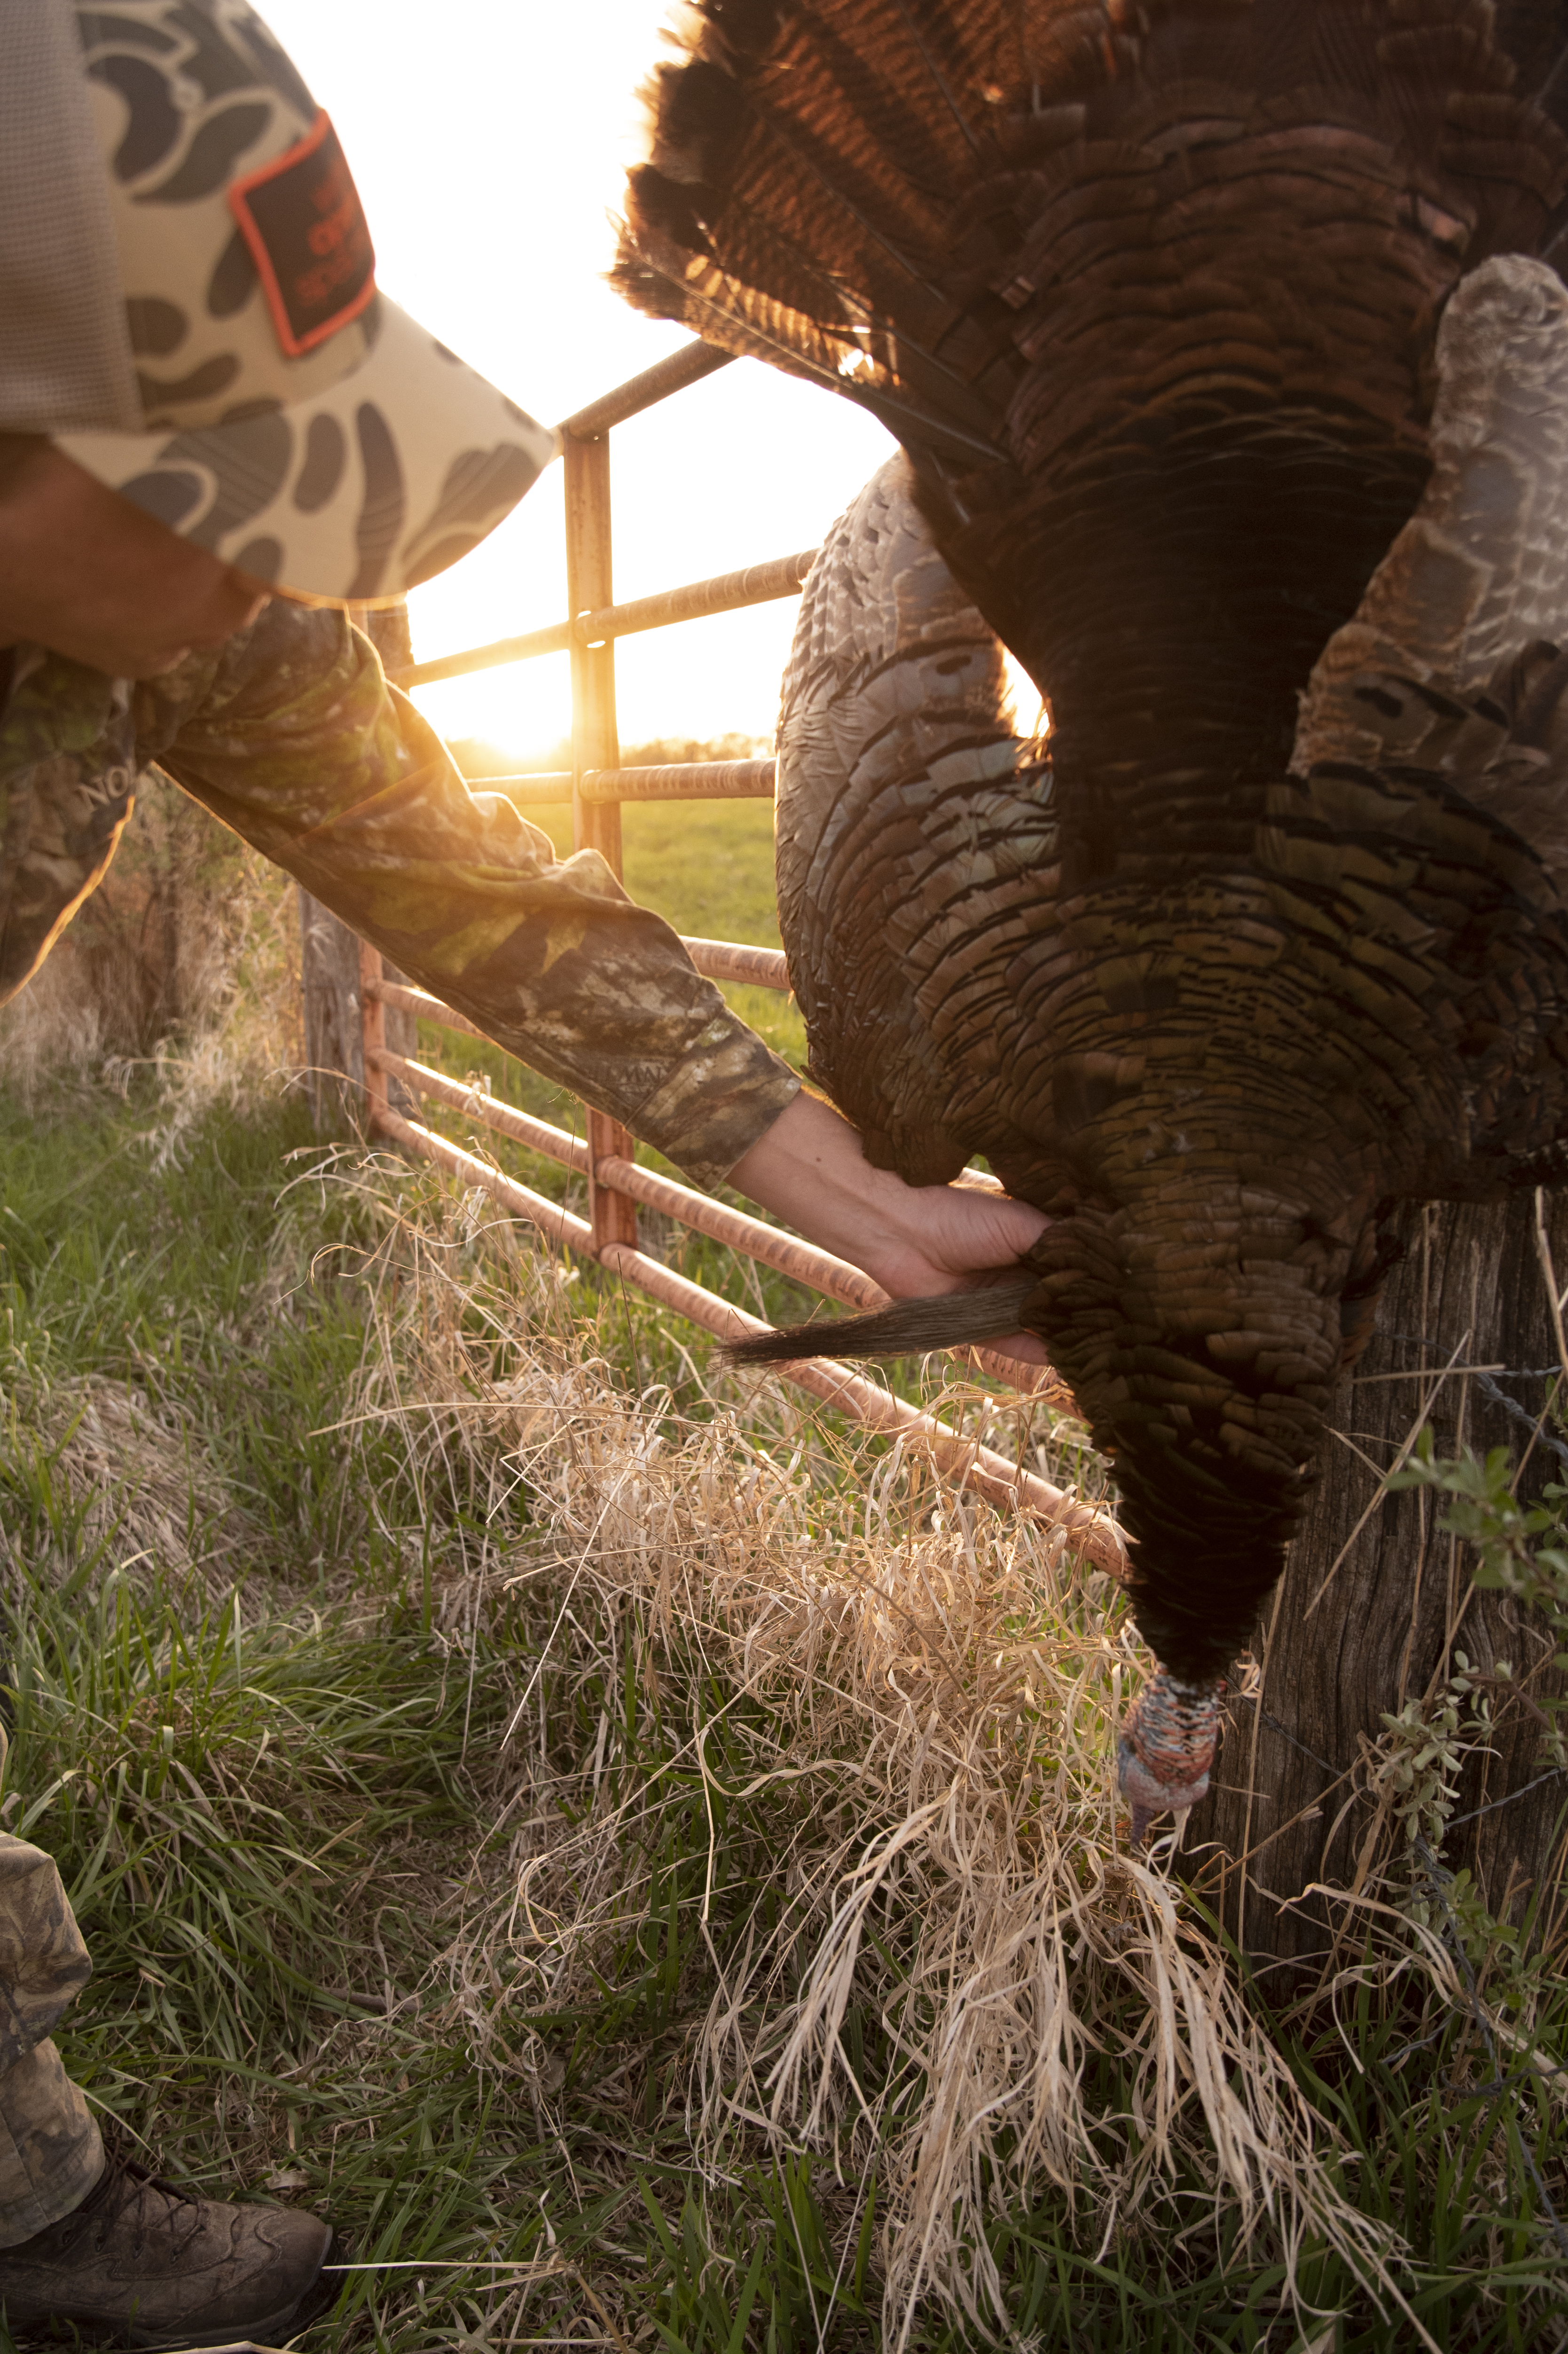 Turkey Grand Slam: All the Species Needed to Accomplish the Goal